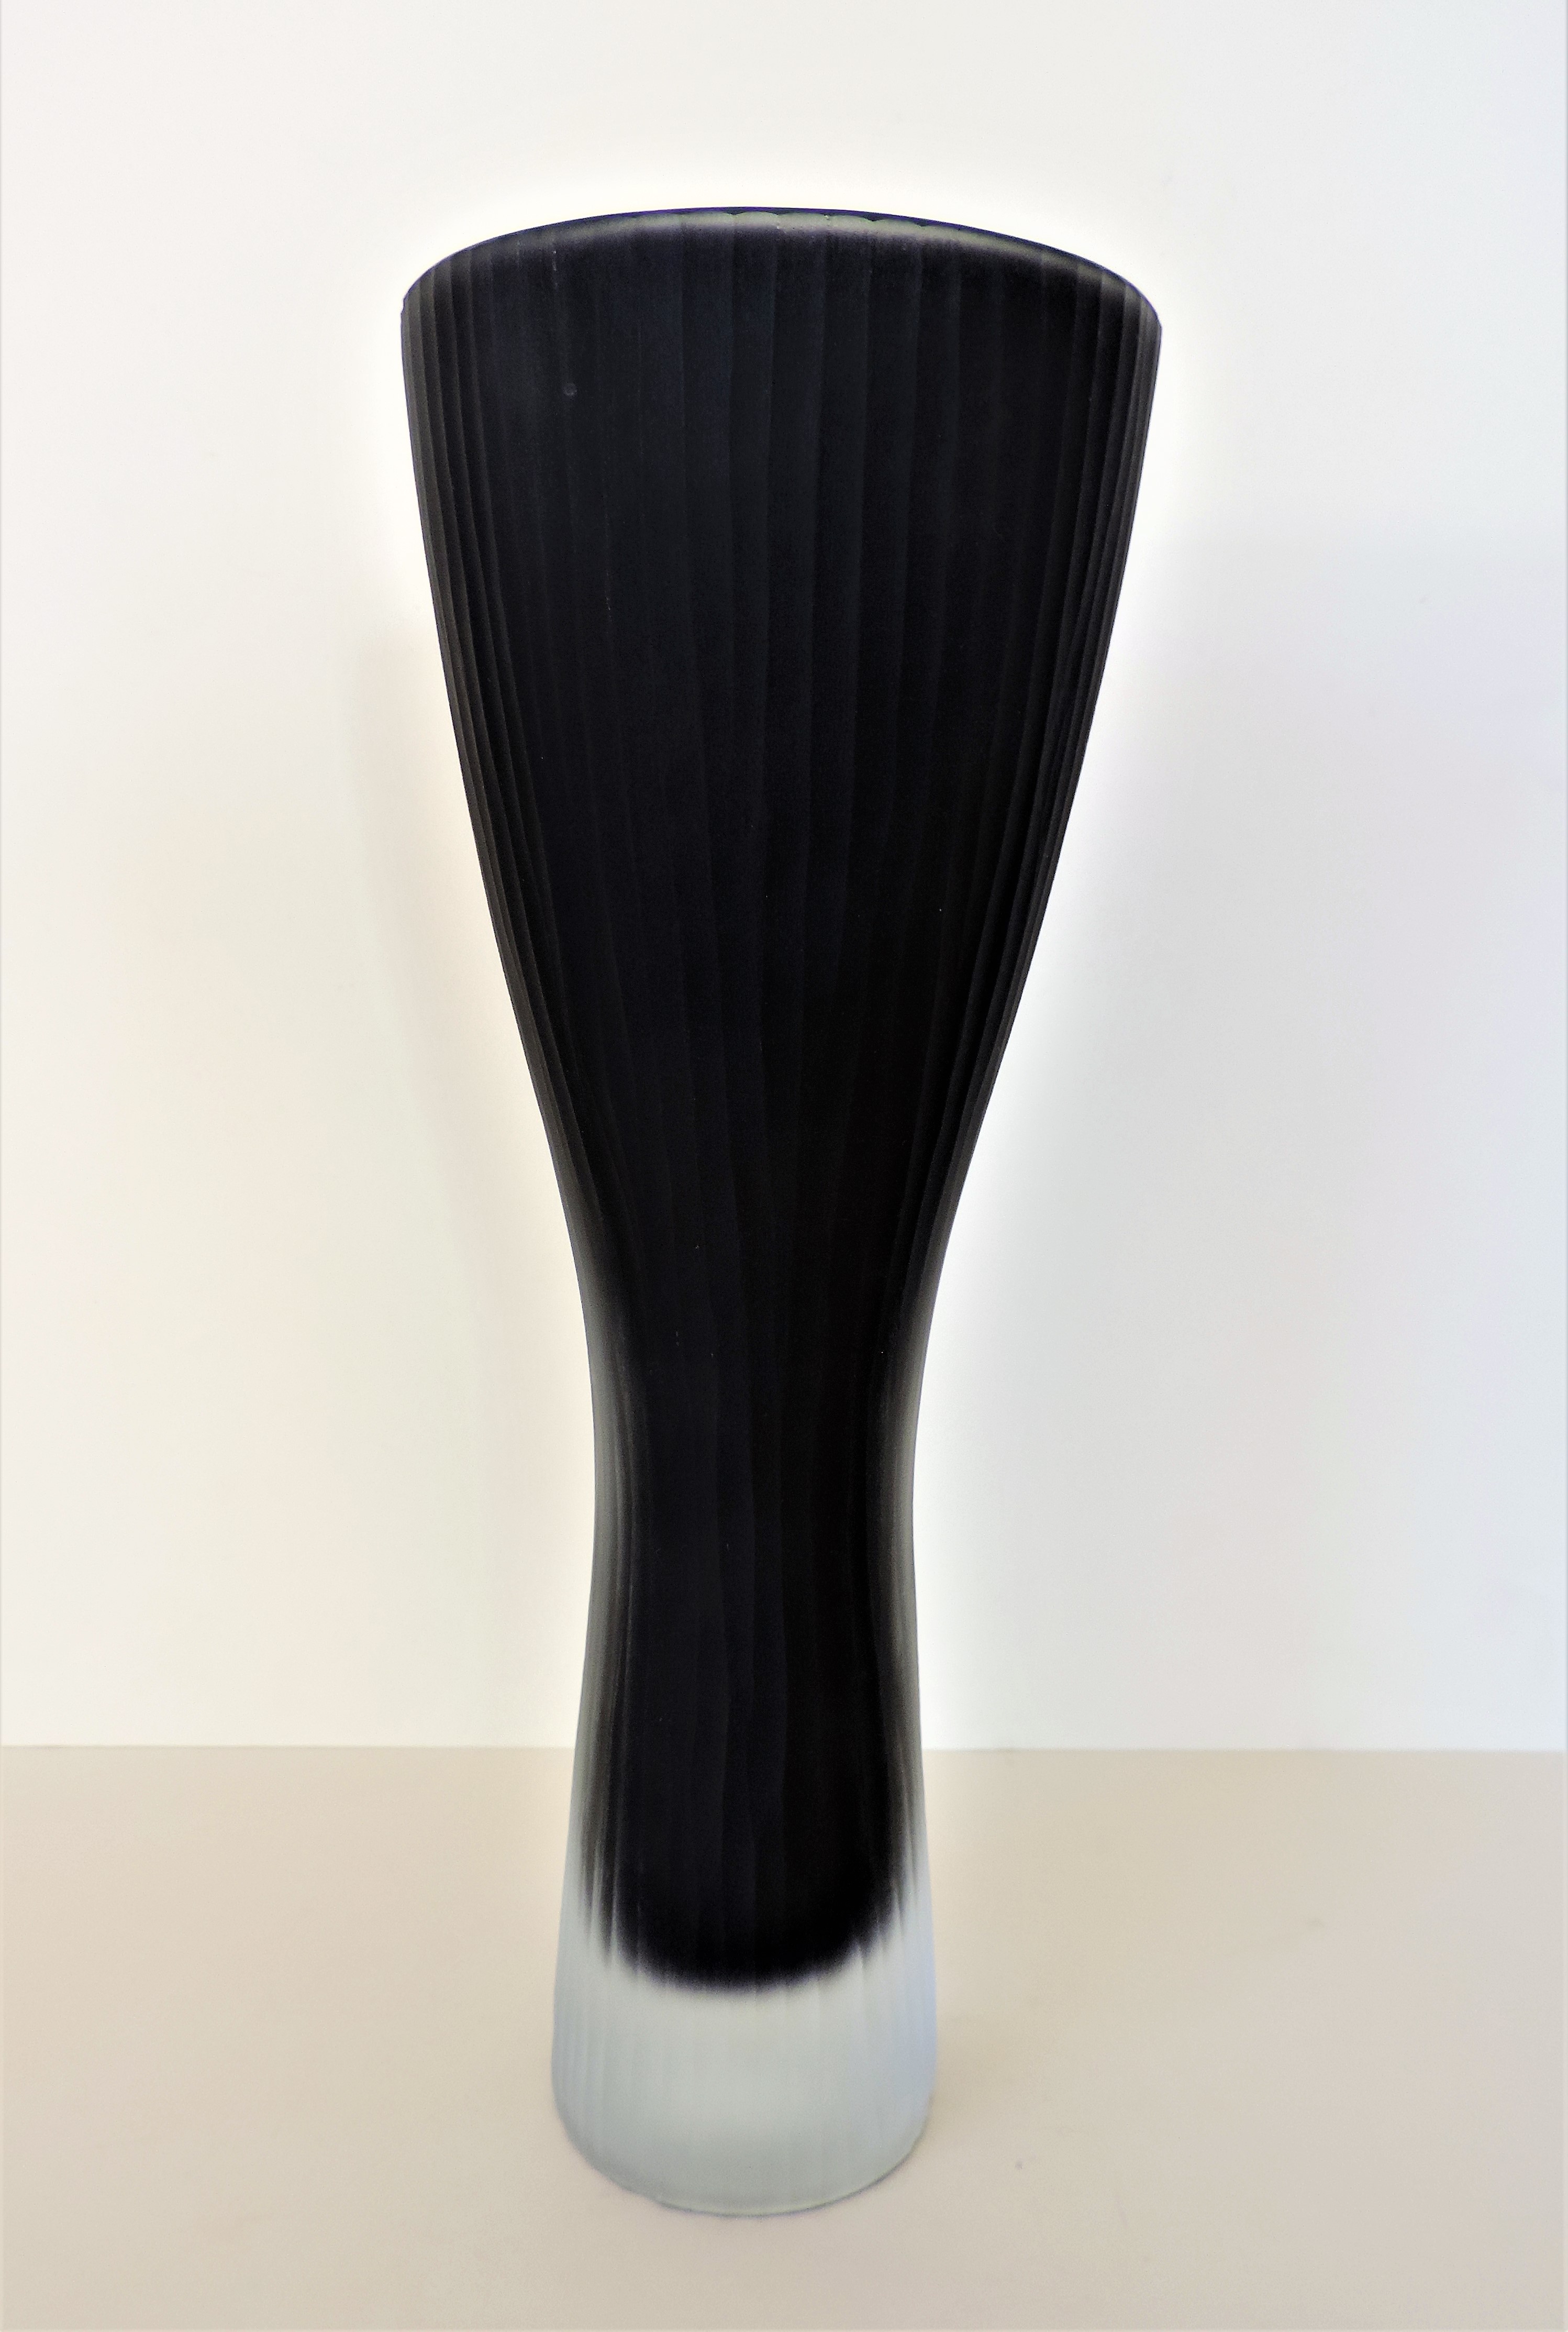 Textured Art Glass Black to Clear Vase 32cm High.